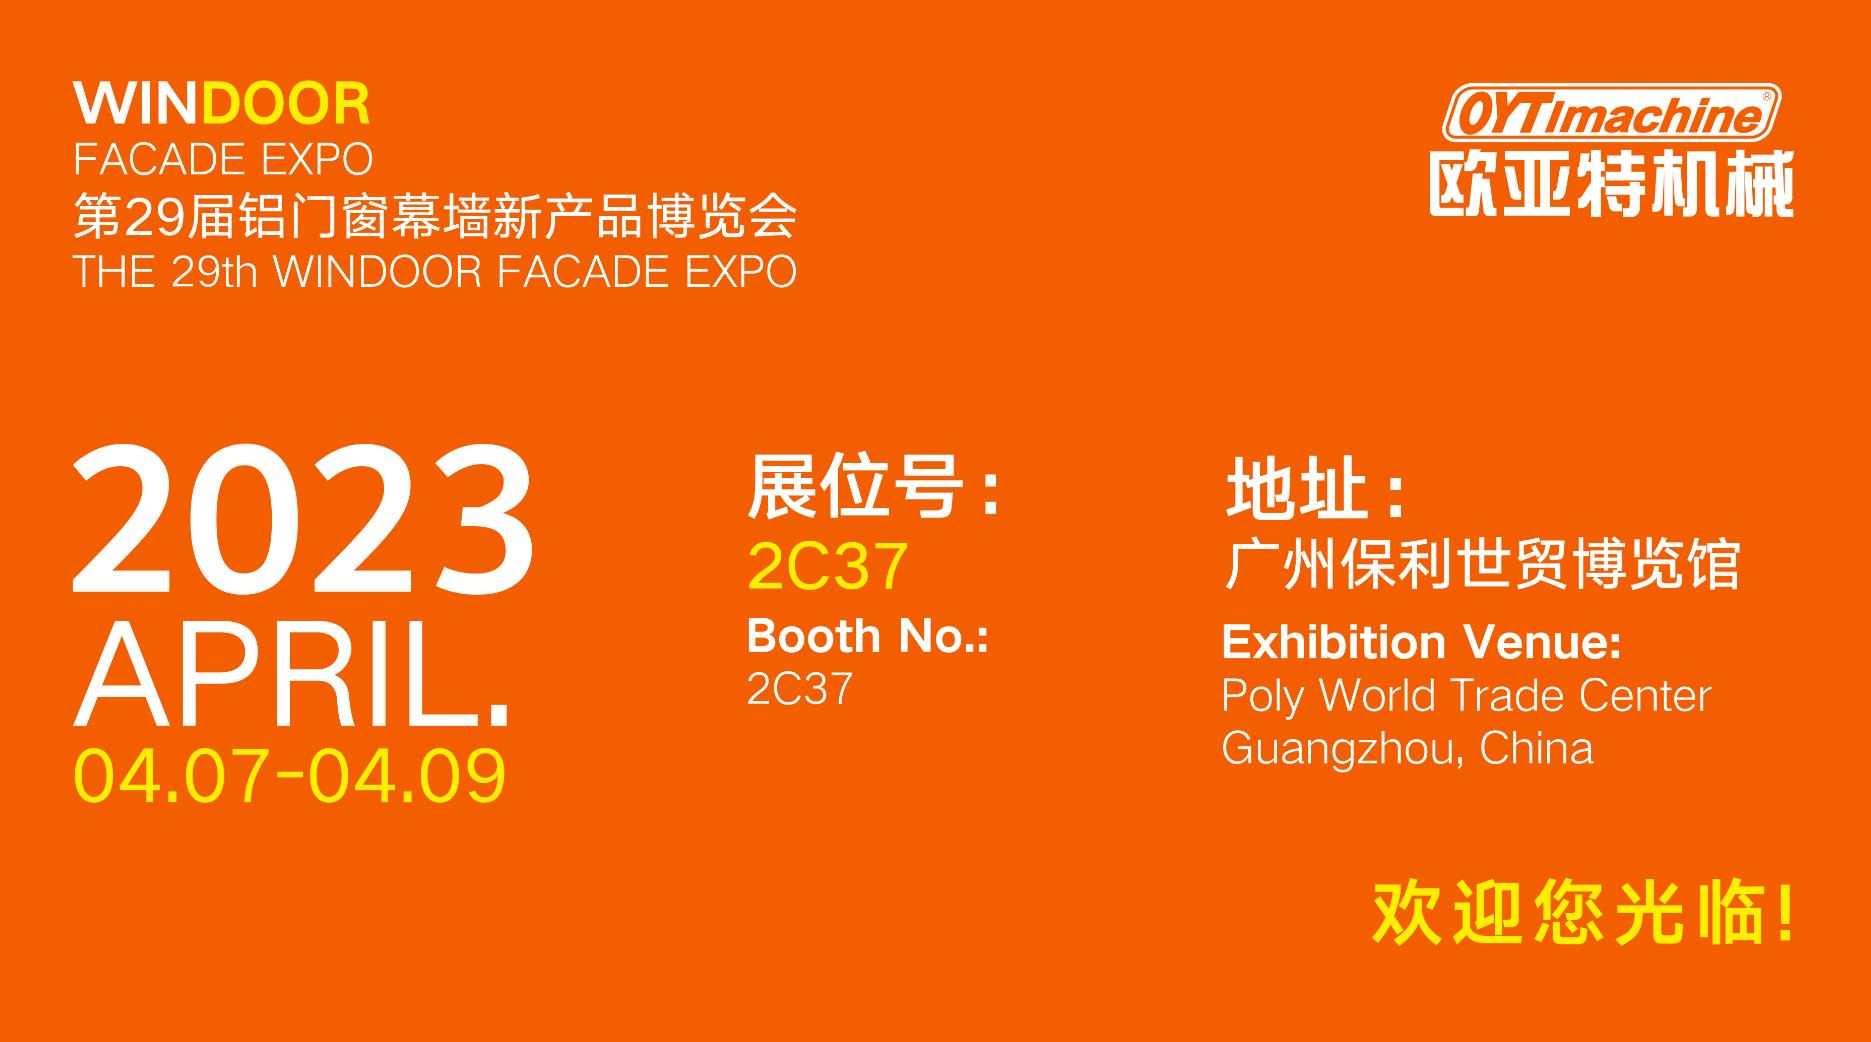 Welcome to visit us at stand 2C37 at the 29th WINDOOR FACADE EXPO during 7-9,Apr.,2023